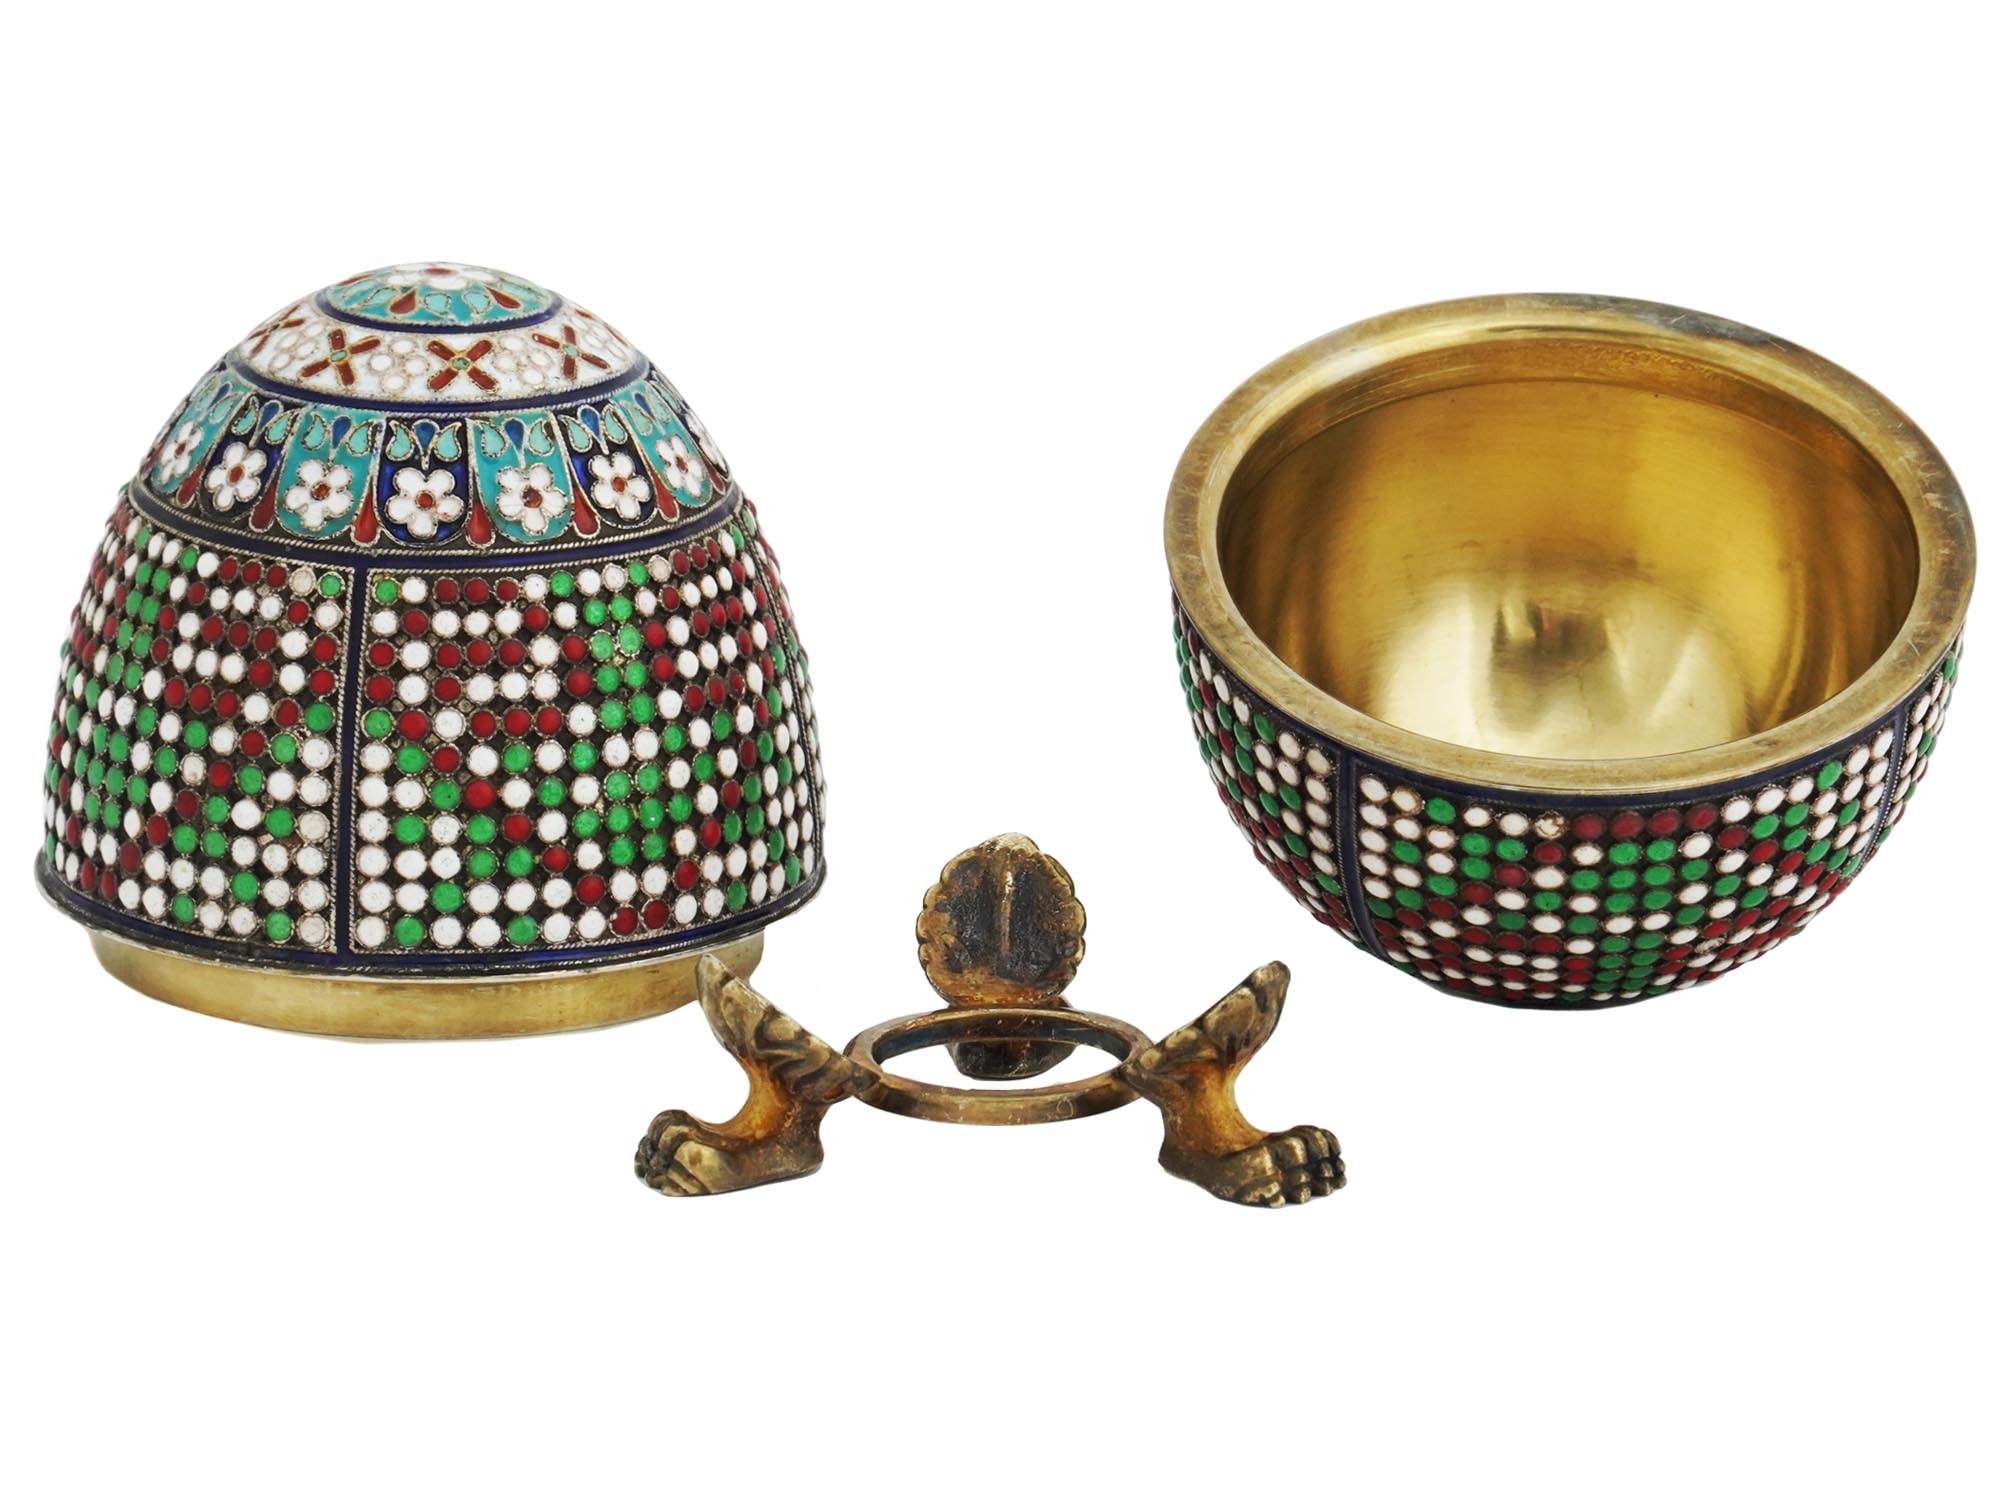 RUSSIAN GILT SILVER ENAMEL EGG CASKET ON STAND PIC-1